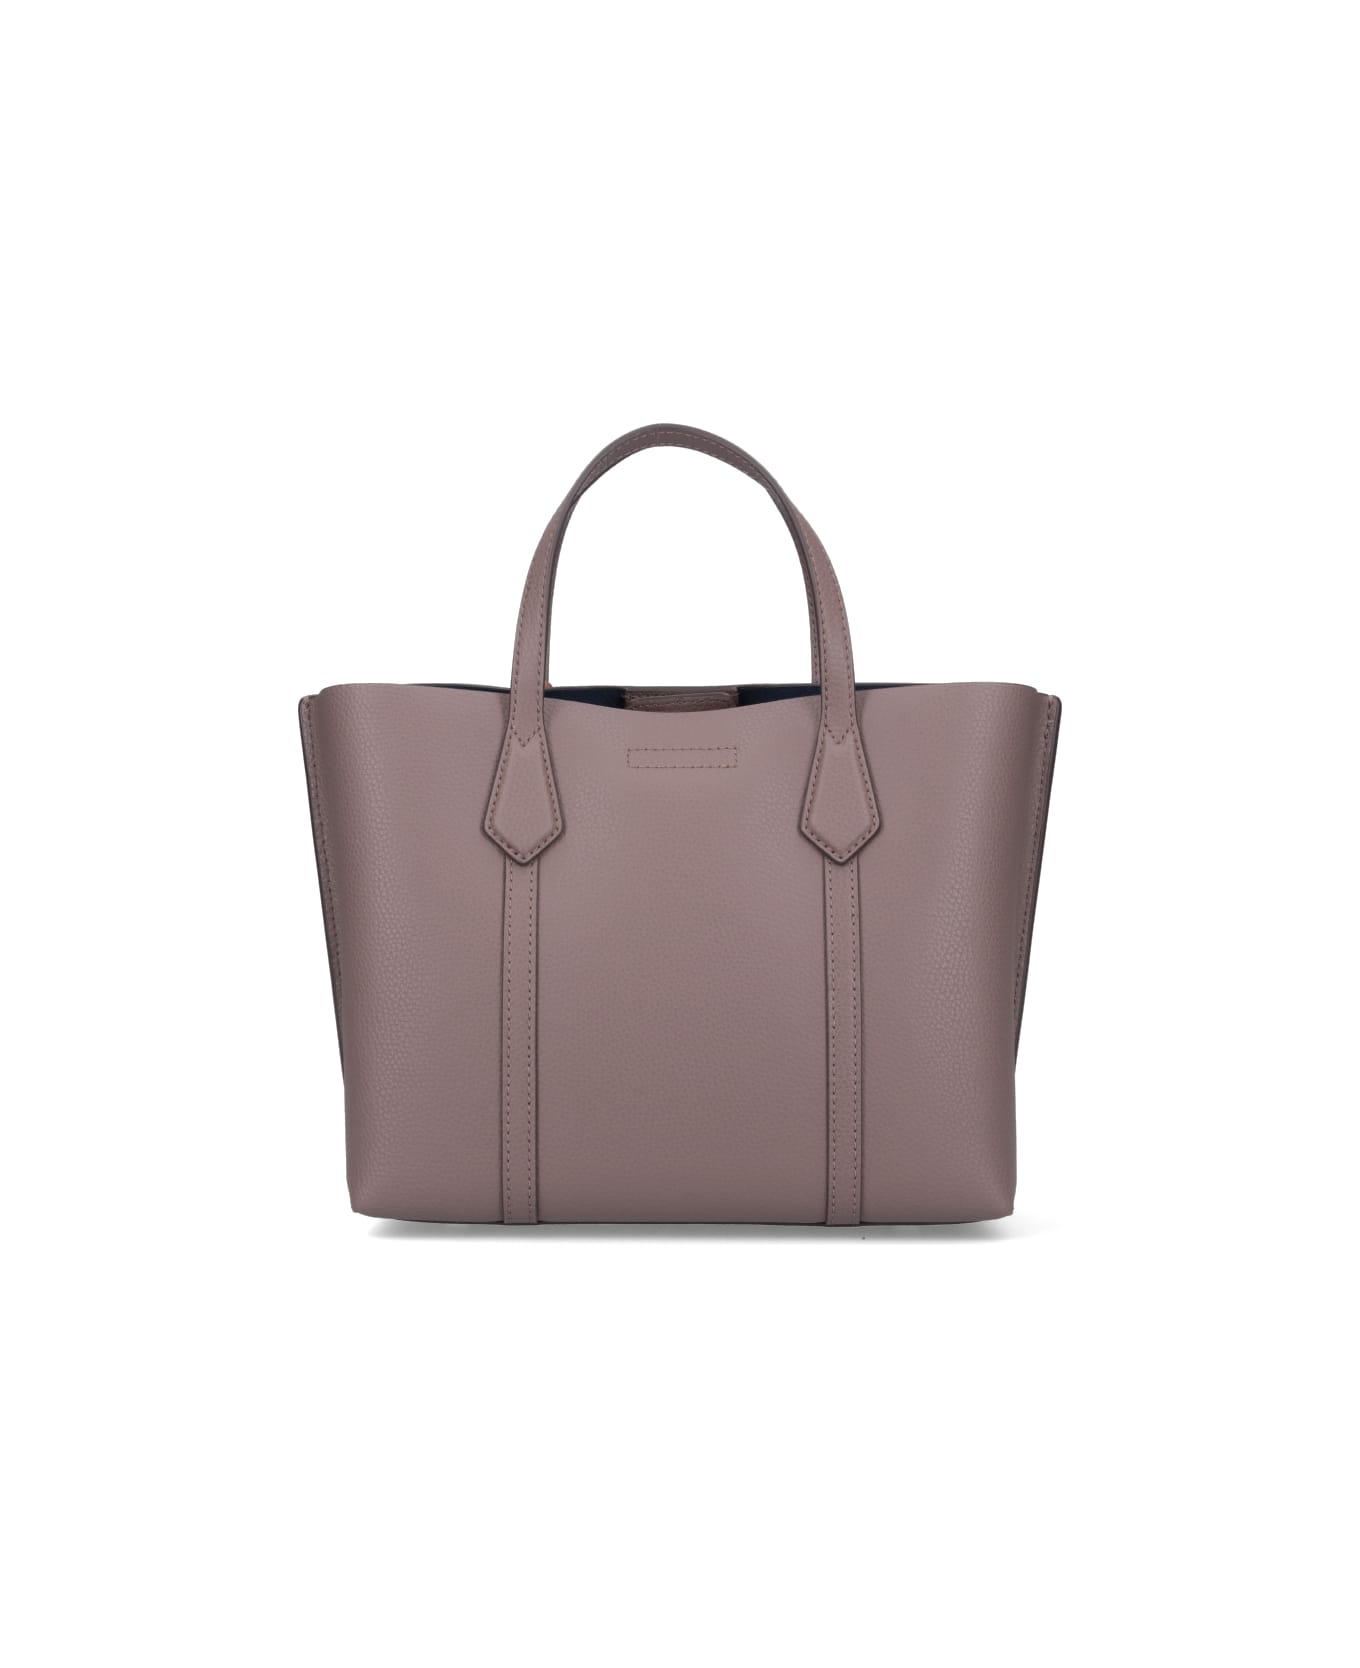 Tory Burch Small Tote Bag "perry" - Taupe